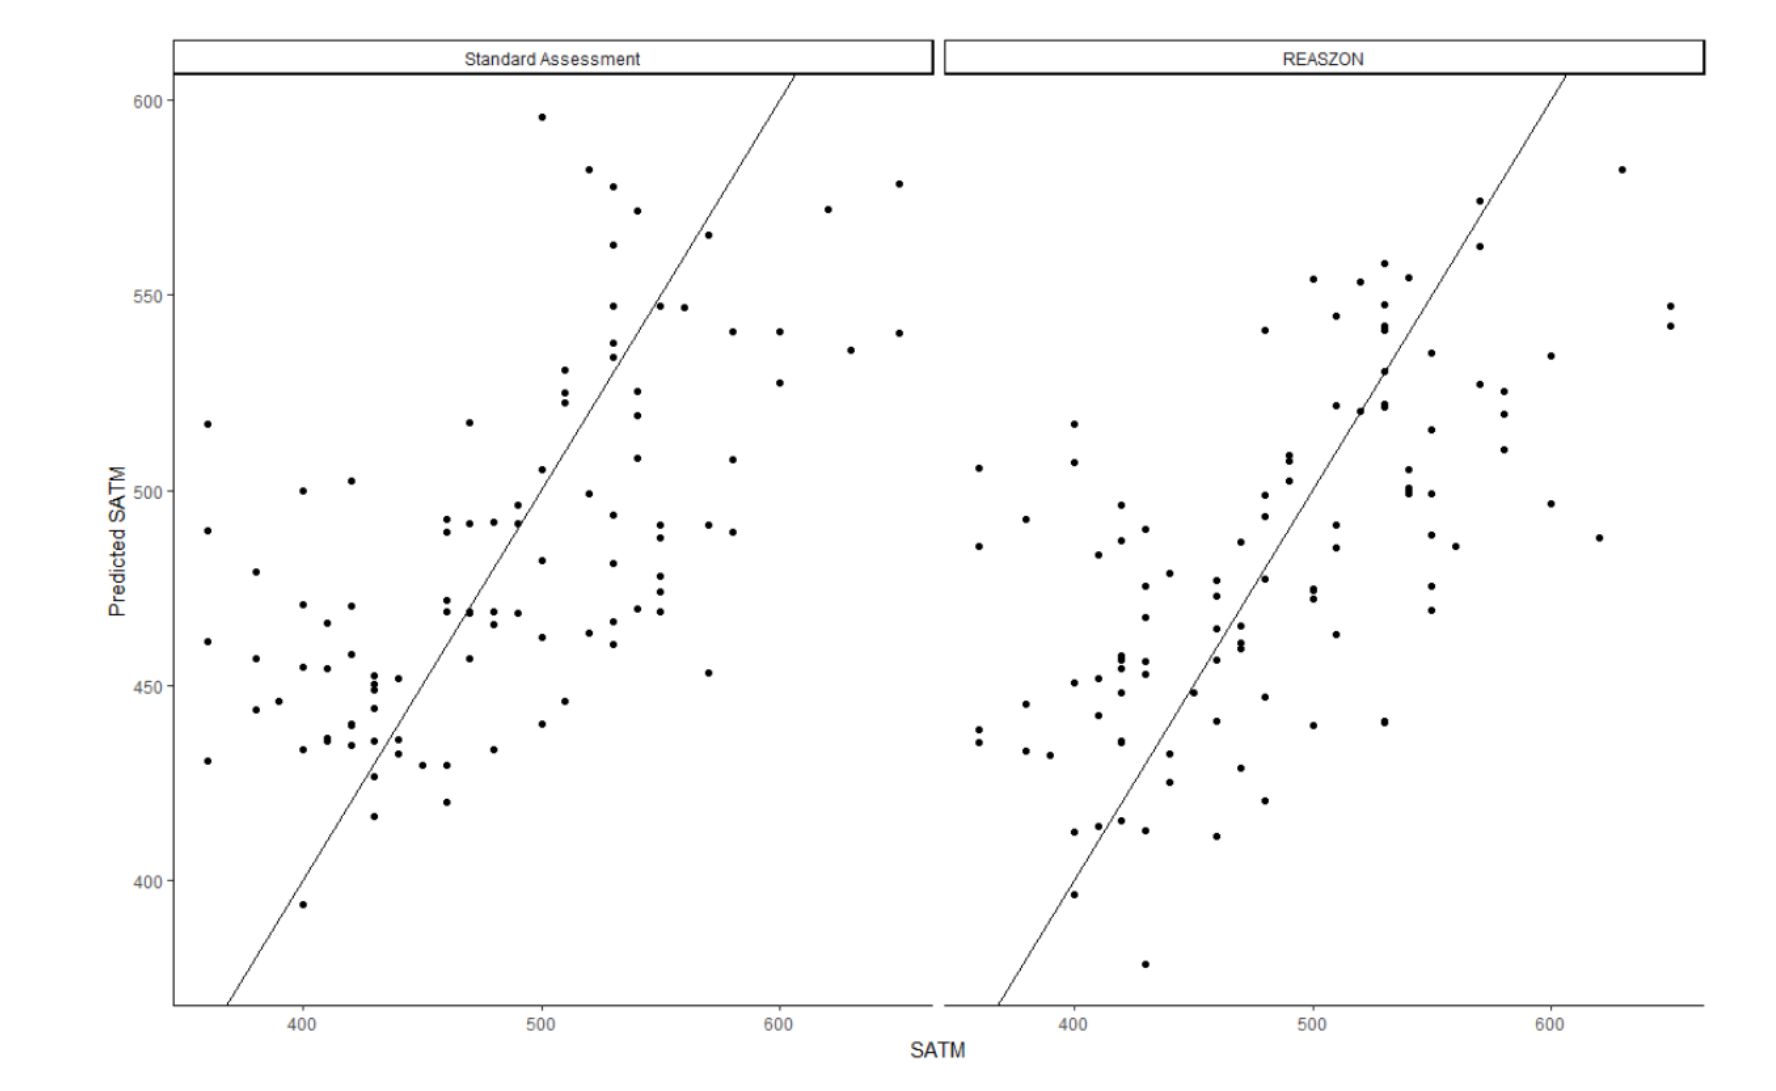 A scatter chart with trend lines comparing the Reaszon assessment to standard assements.